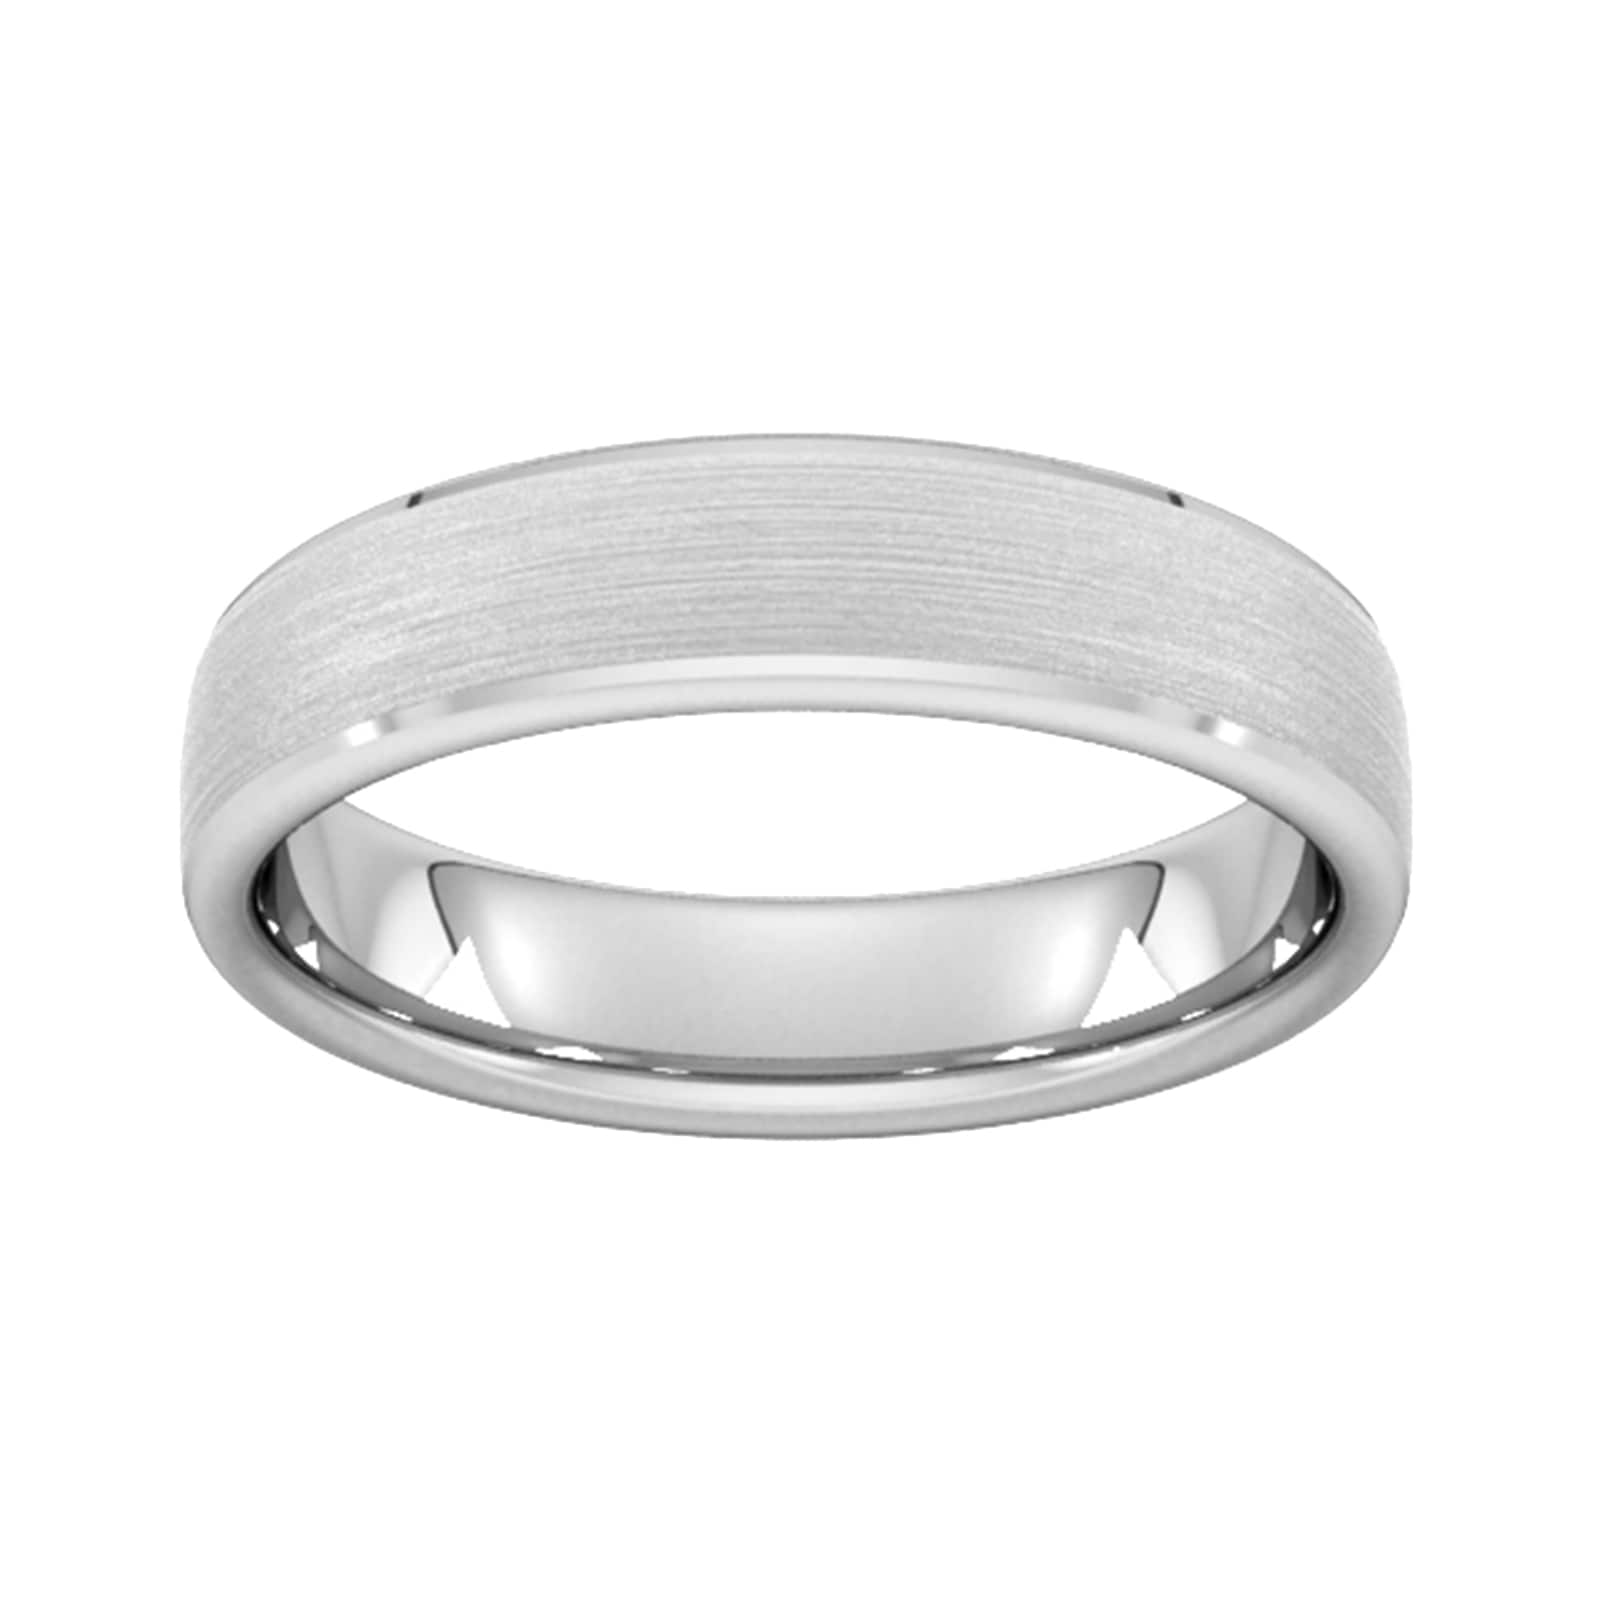 5mm D Shape Standard Polished Chamfered Edges With Matt Centre Wedding Ring In Platinum - Ring Size W